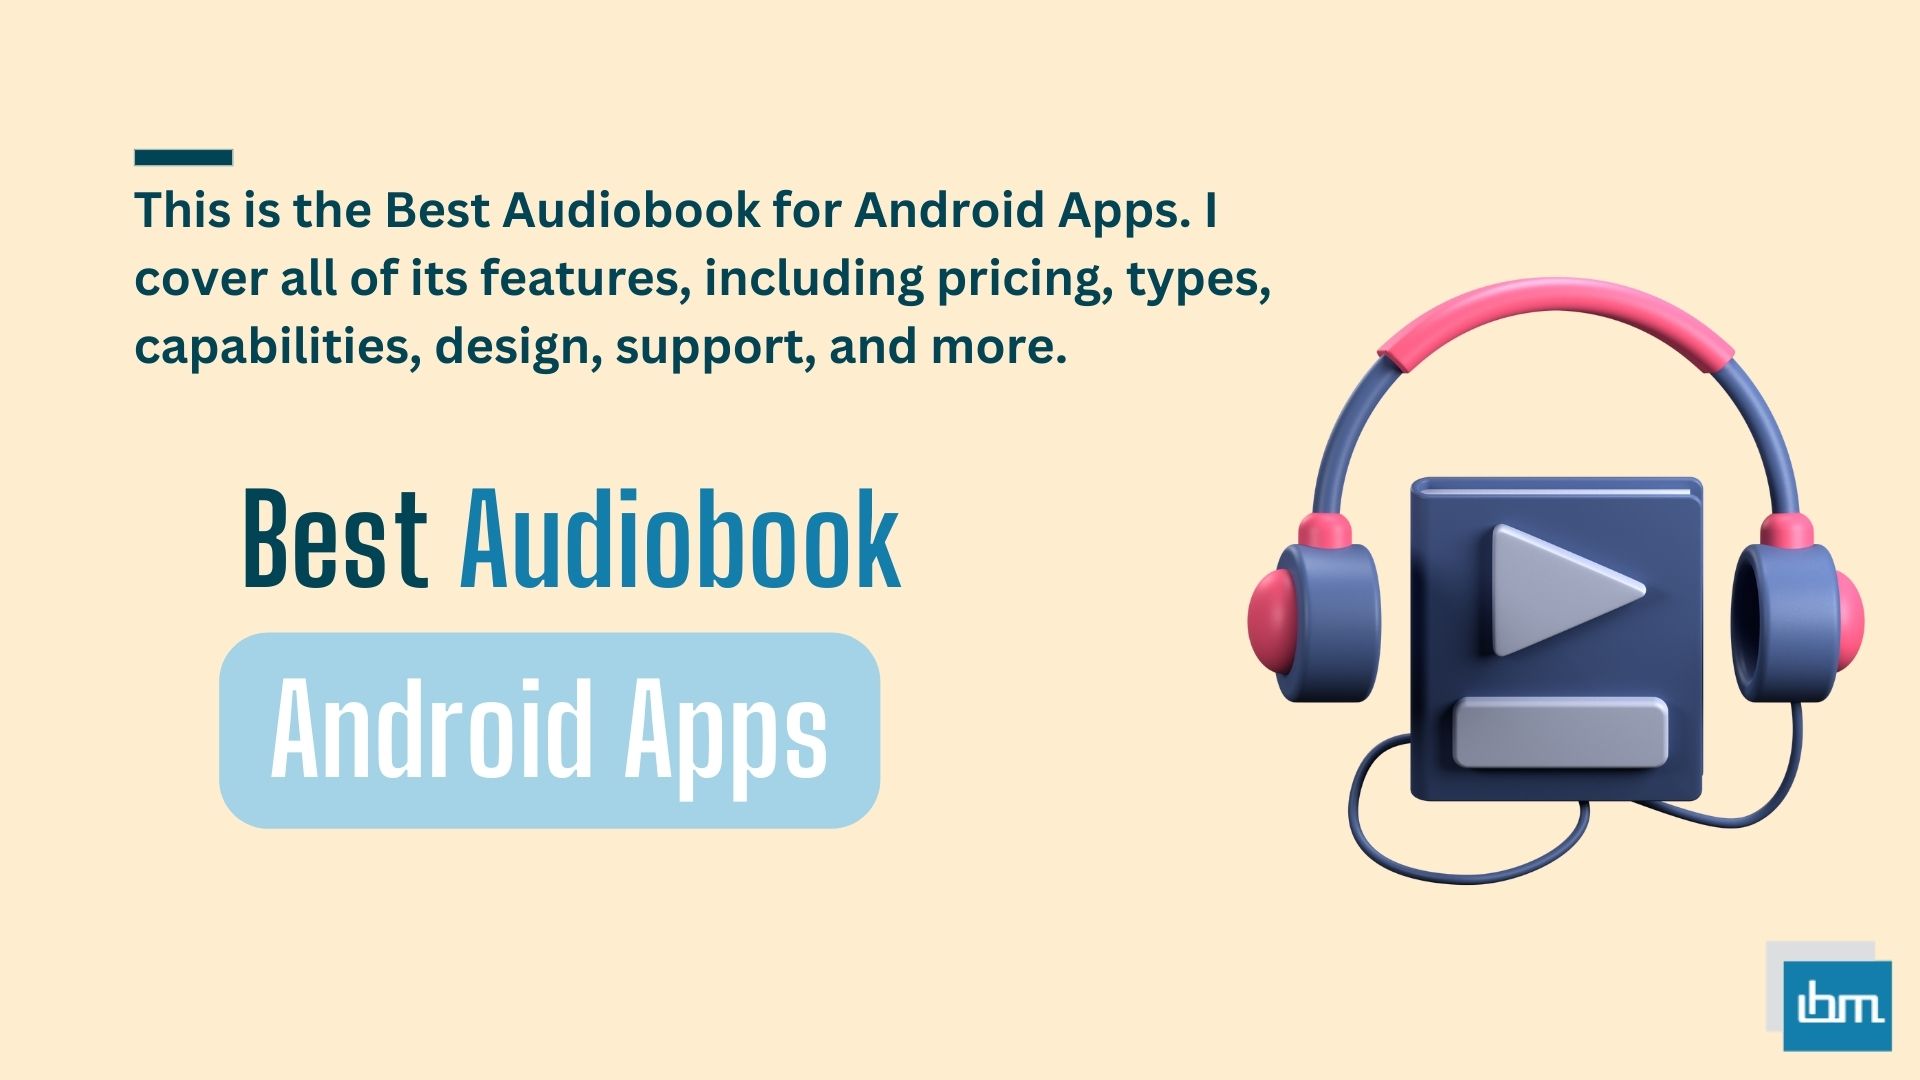 Best Audiobook for Android Apps